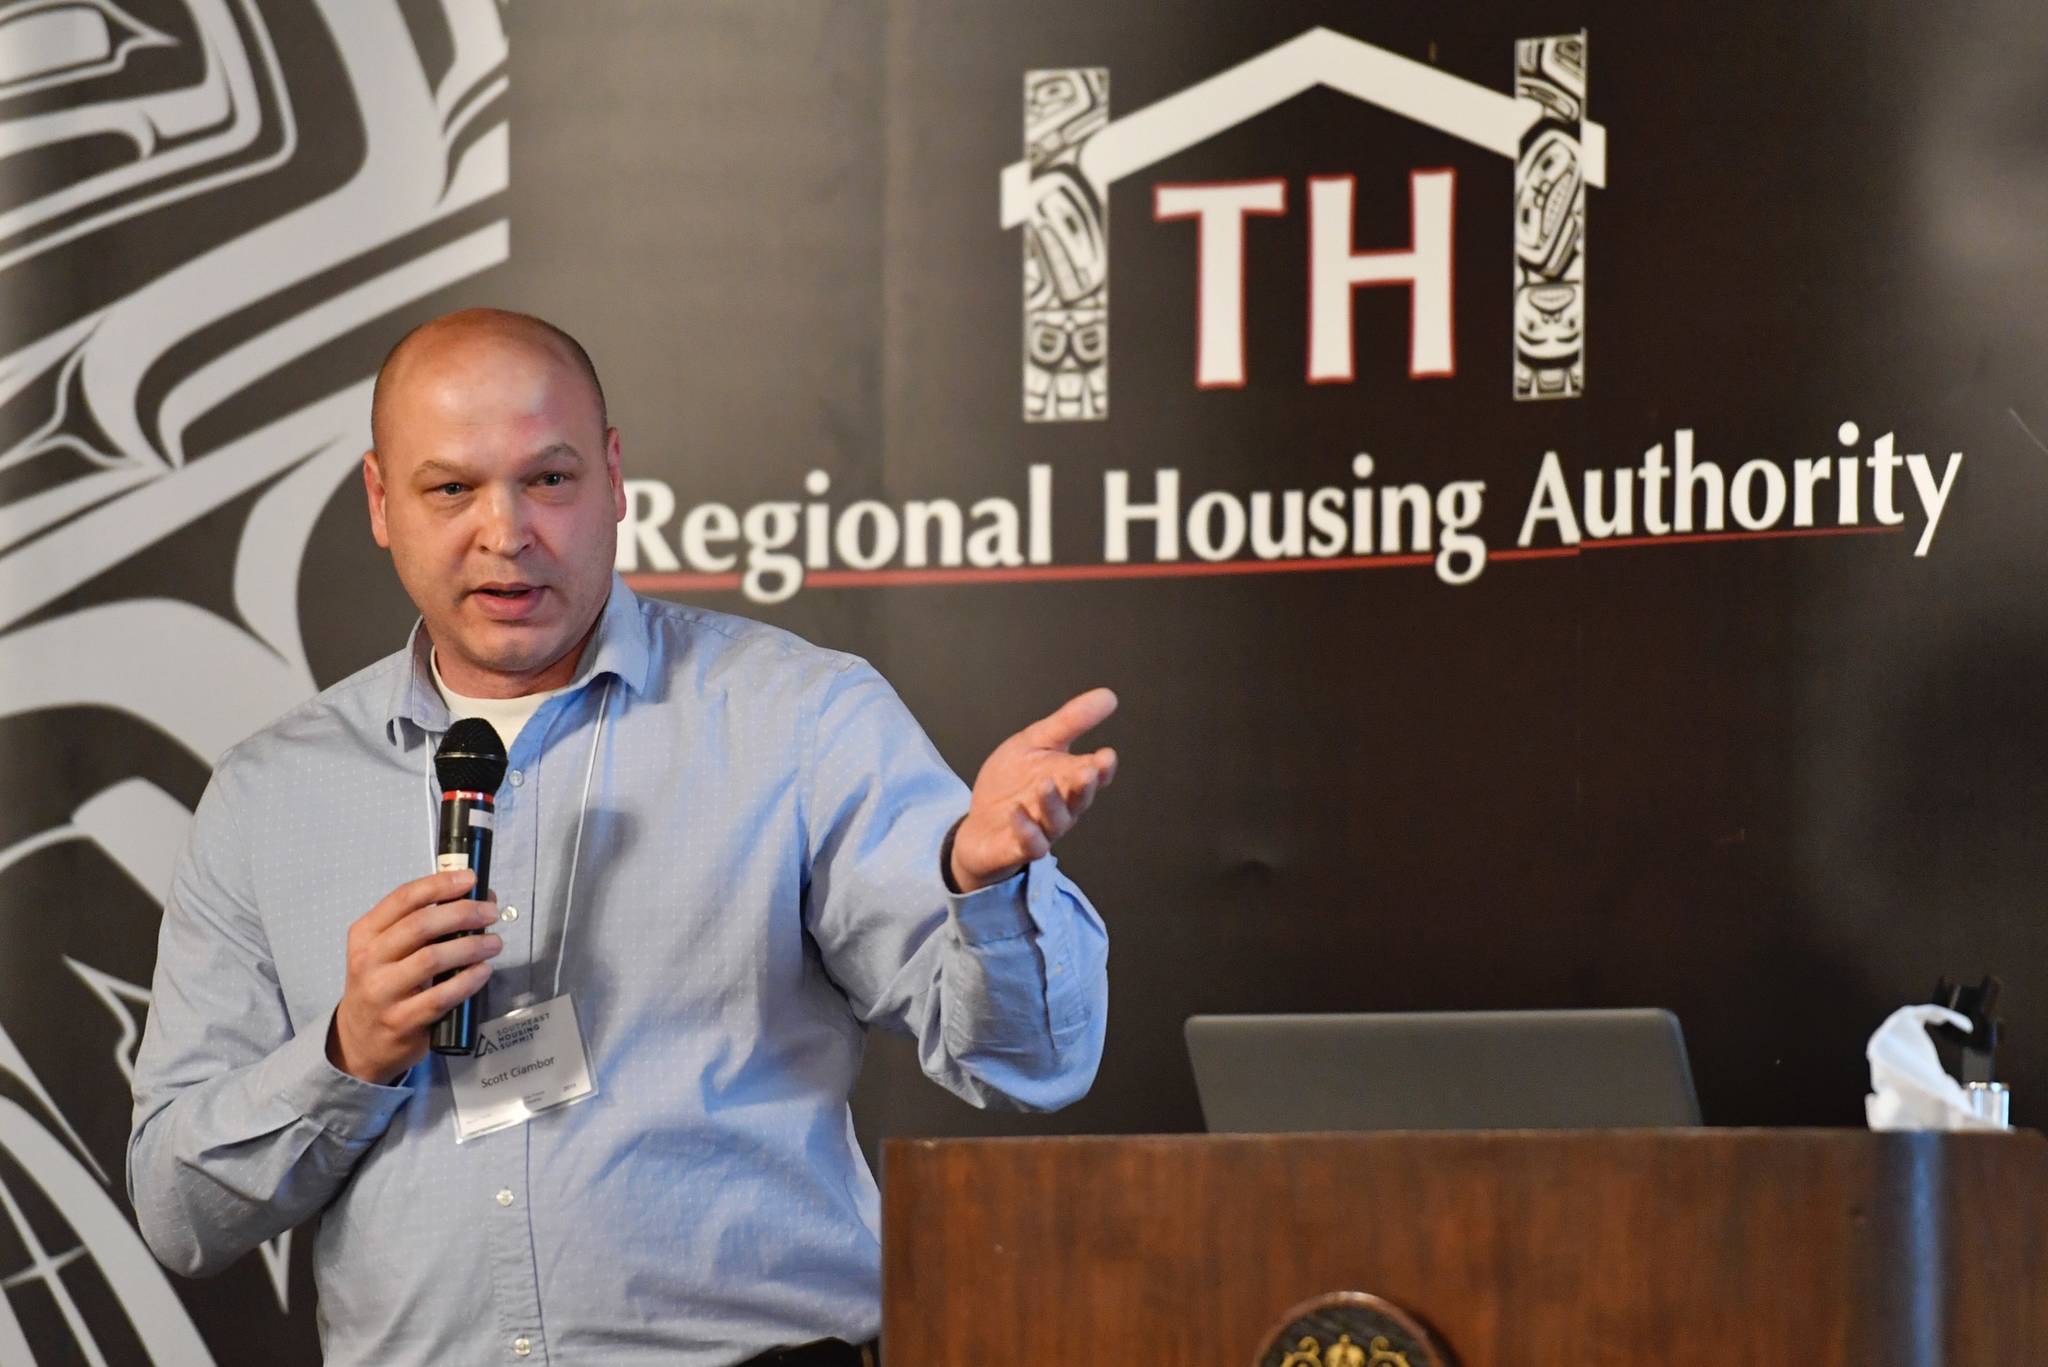 Scott Ciambor, chief housing gfficer for the City and Borough of Juneau and board chair for the Alaska Coalition on Housing and Homelessness, speaks at the Southeast Housing Summit at the Baranof Hotel on Wednesday, March 13, 2019. The summit is a two-day program organized by the Tlingit and Haida Regional Housing Authority. (Michael Penn | Juneau Empire)